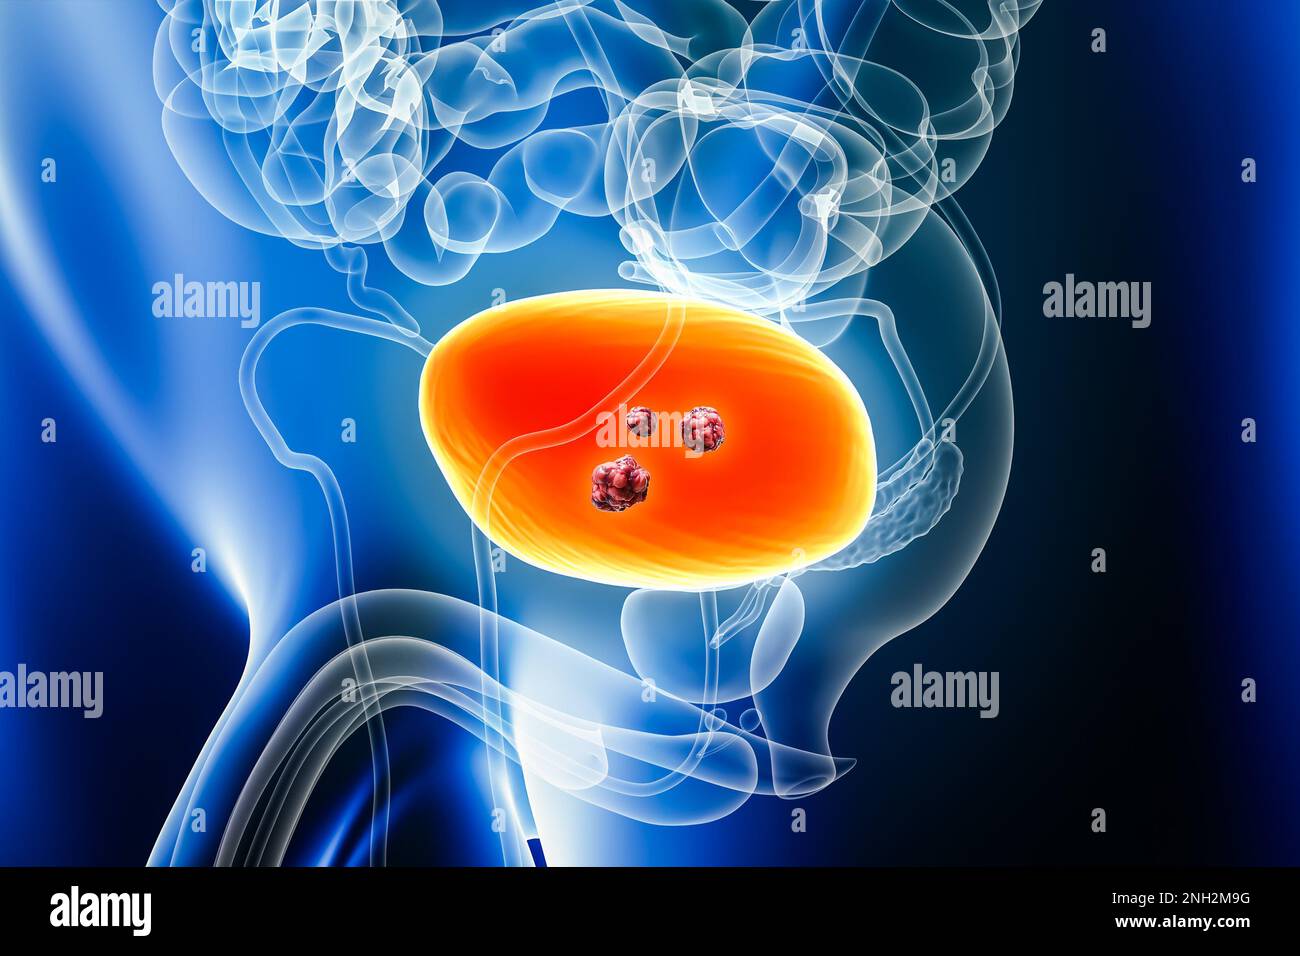 Urinary bladder cancer with organs and tumors or cancerous cells 3D rendering illustration with male body. Anatomy, oncology, biomedical, disease, med Stock Photo